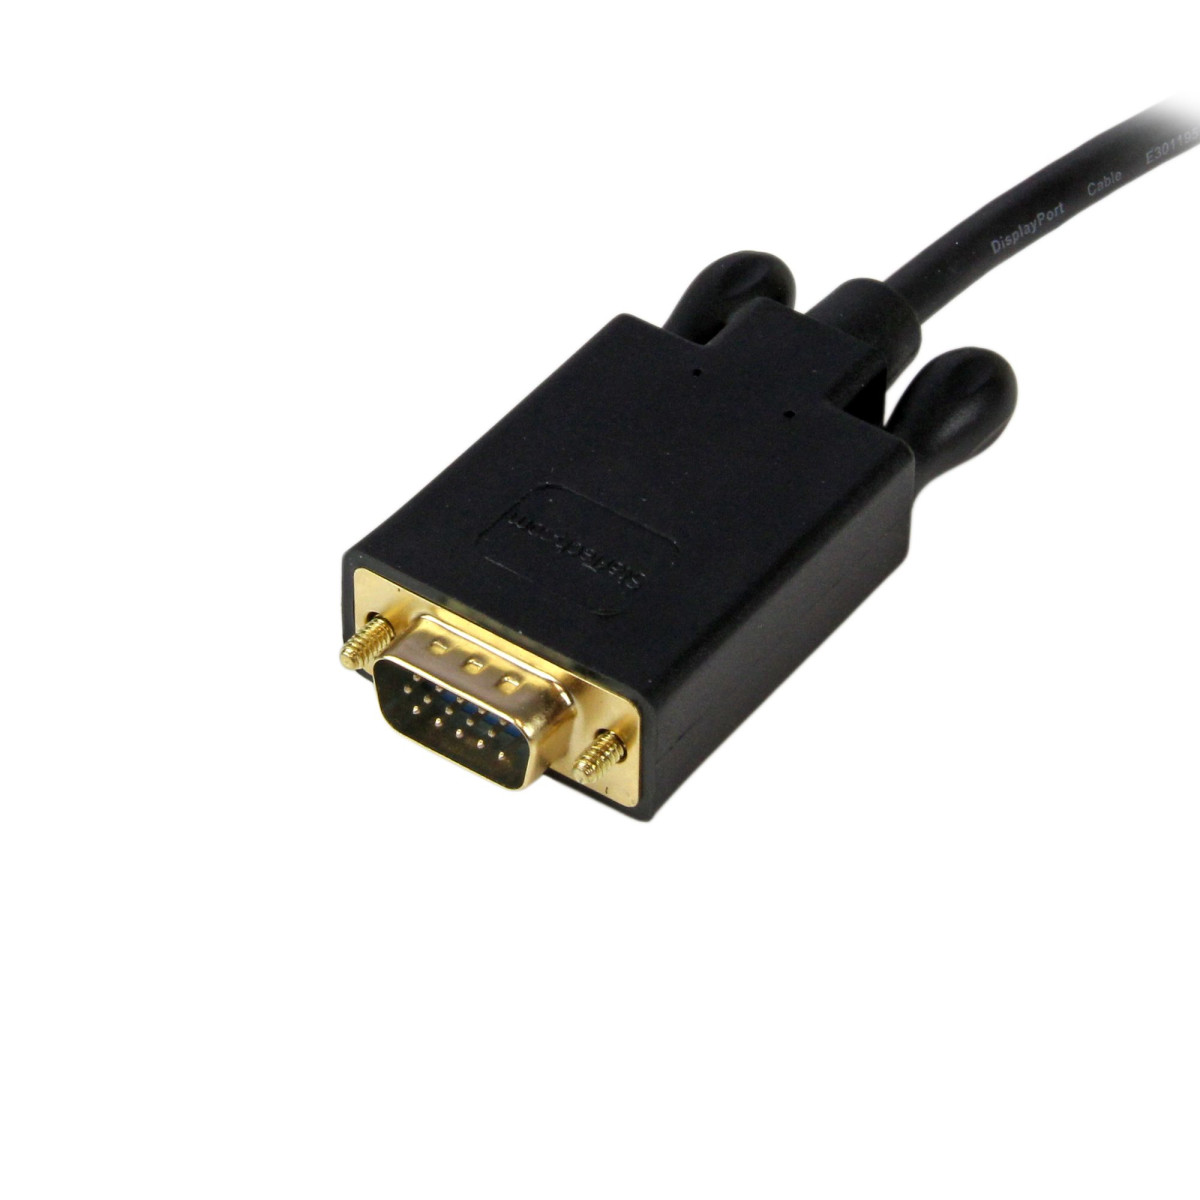 10ft DisplayP to VGA Adapter Conv Cable